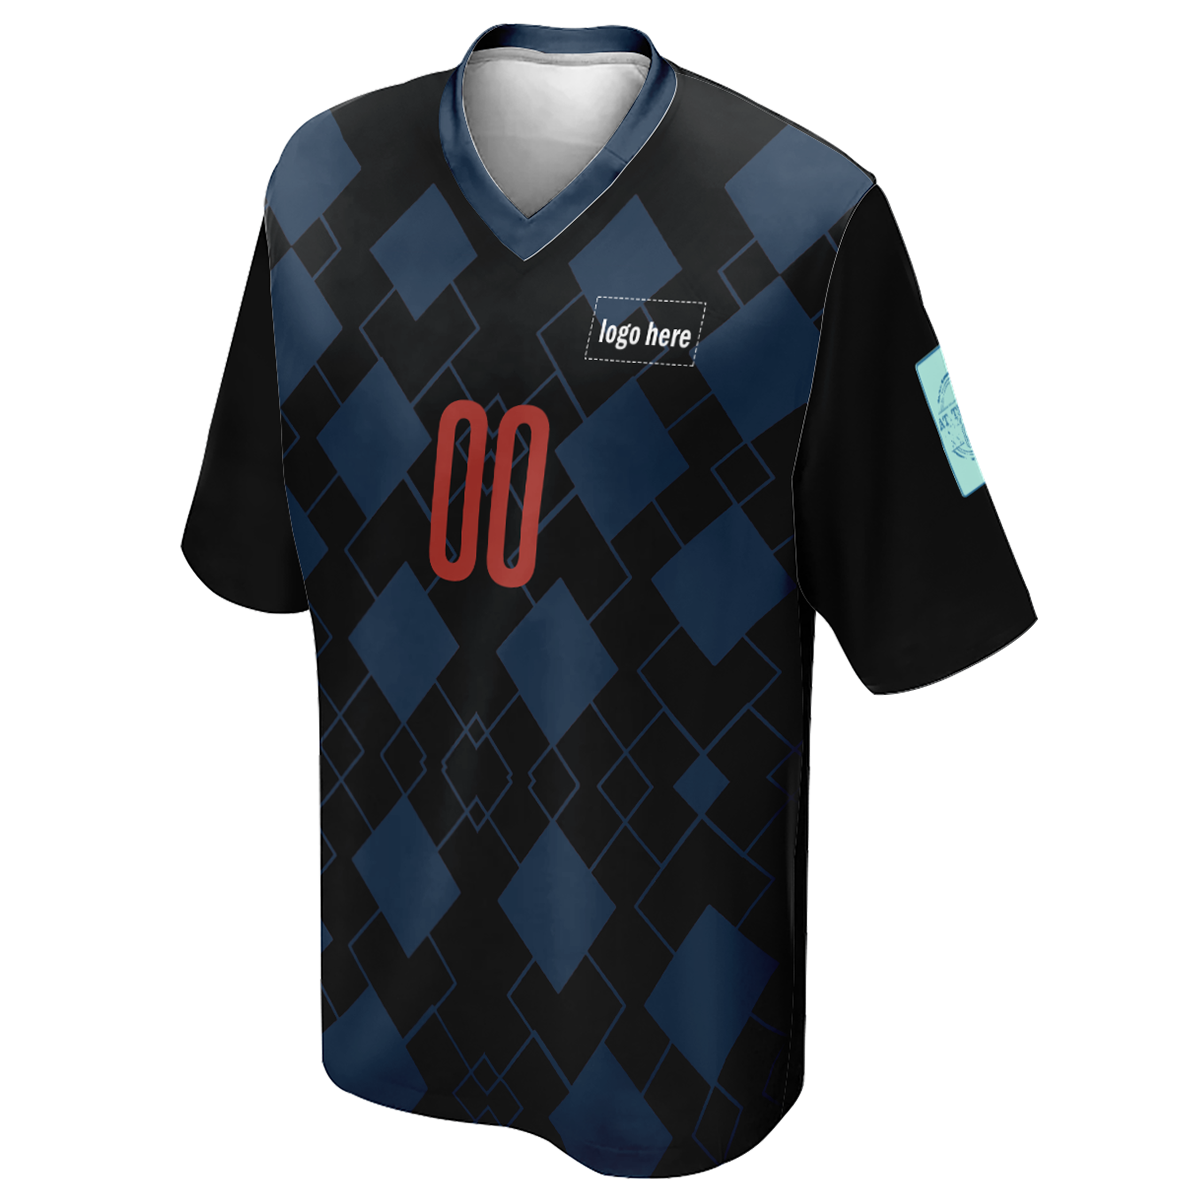 Men's Printed Croatia World Cup Custom Soccer Jersey With Name